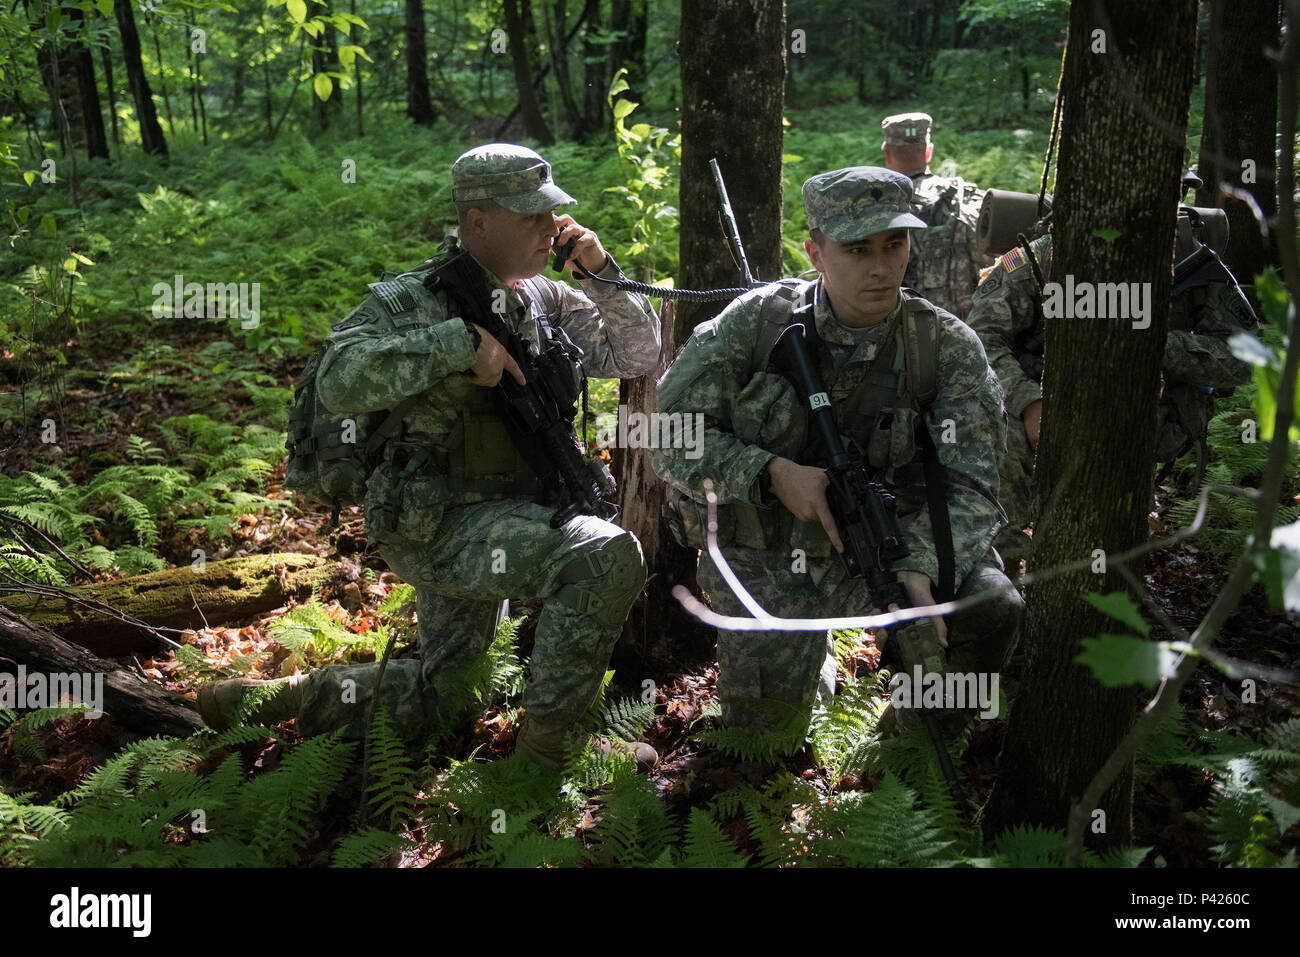 U.S. Army Sgt. Graham Skinner, a scout with Headquarters, Headquarters Company, 3rd Battalion, 172nd Infantry Regiment (Mountain), Vermont National Guard, relays information to headquarters during a reconnaissance training mission, Camp Ethan Allen Training Site, Jericho, Vt., June 6, 2016. Skinner’s company is participating in multiple training events over the next two weeks as part of their annual training. (U.S. Air National Guard photo by Tech. Sgt. Sarah Mattison/Released) Stock Photo